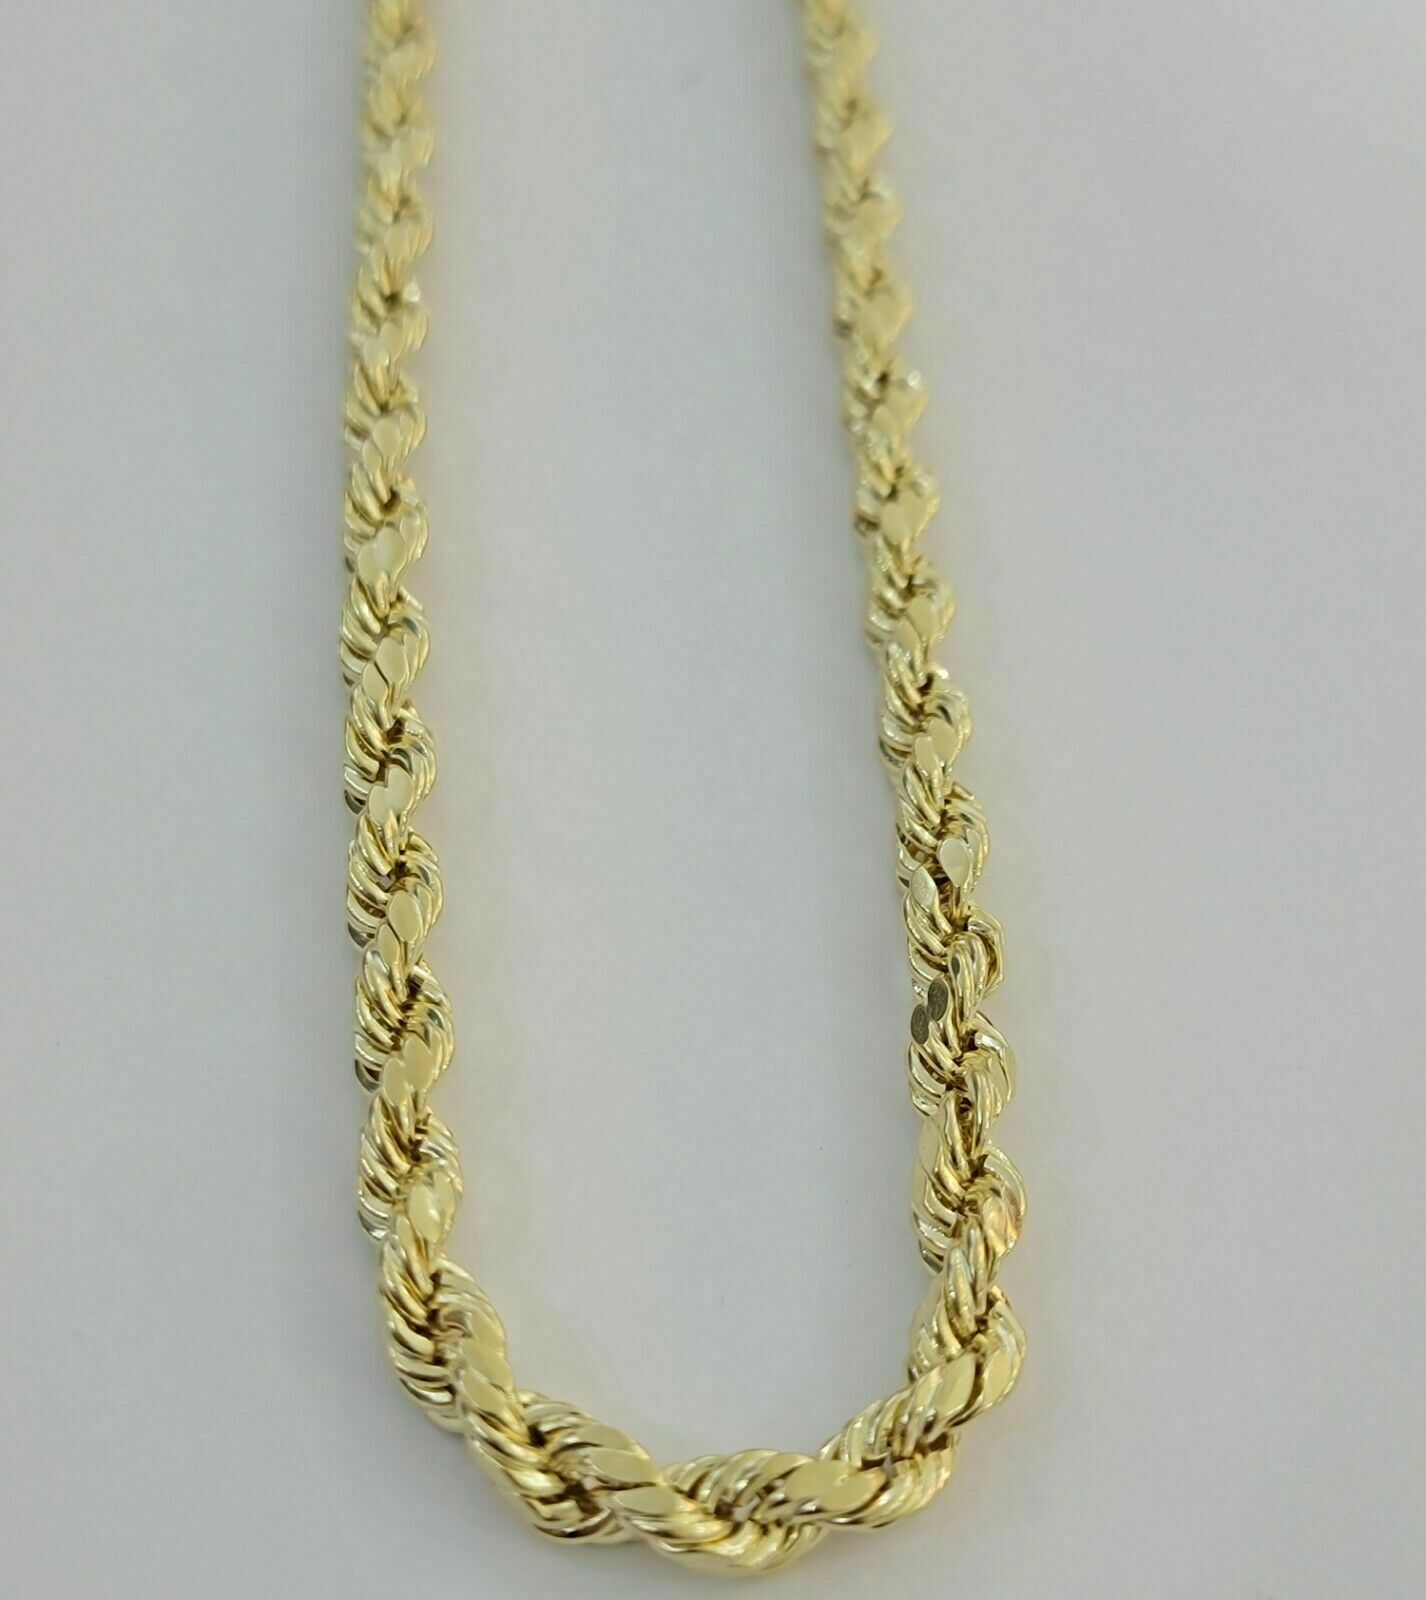 10k Yellow Gold Rope Chain Necklace 18